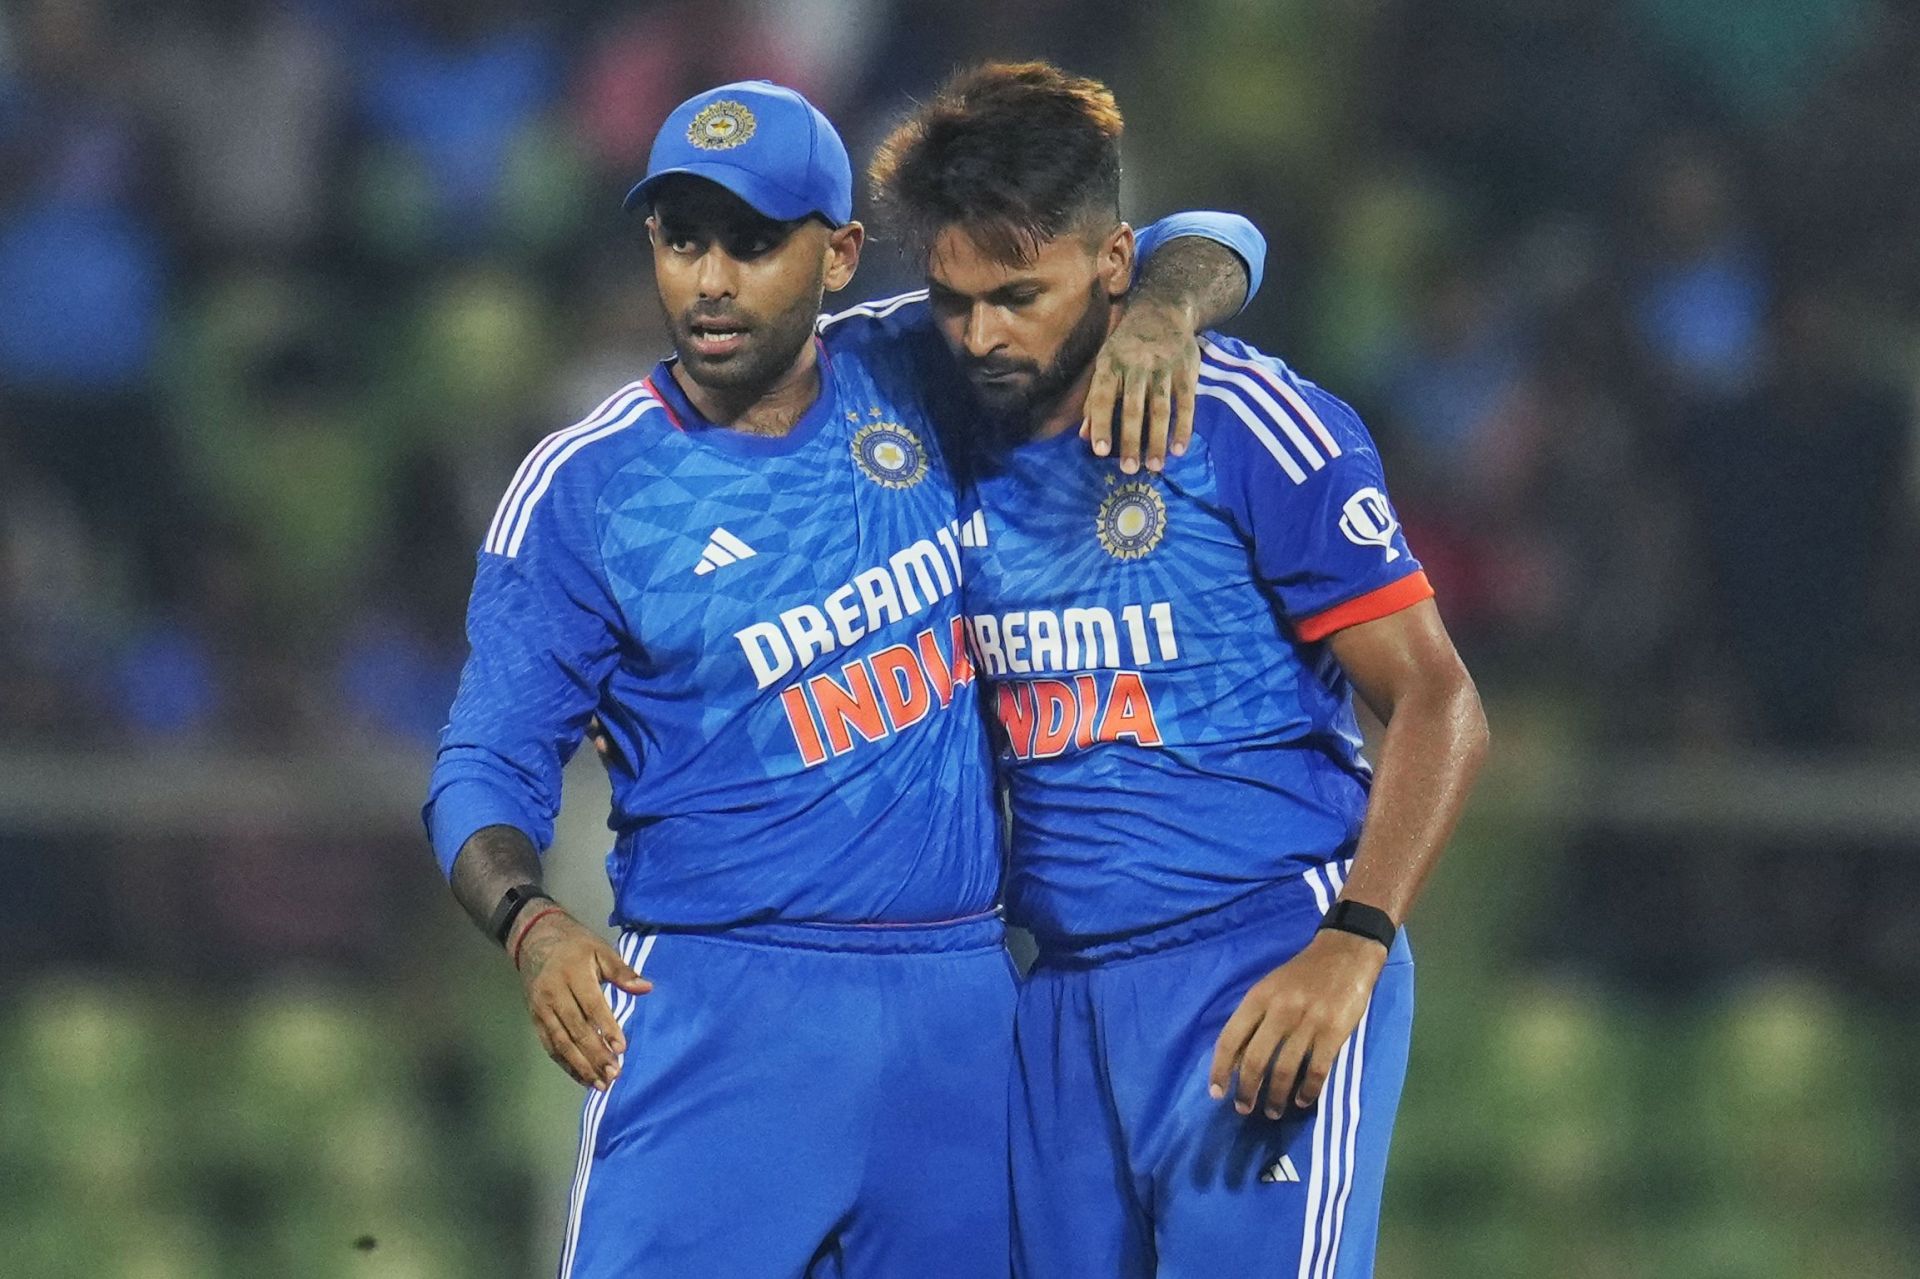 Suryakumar Yadav used only frontline bowlers in the T20I series against Australia. [P/C: AP]